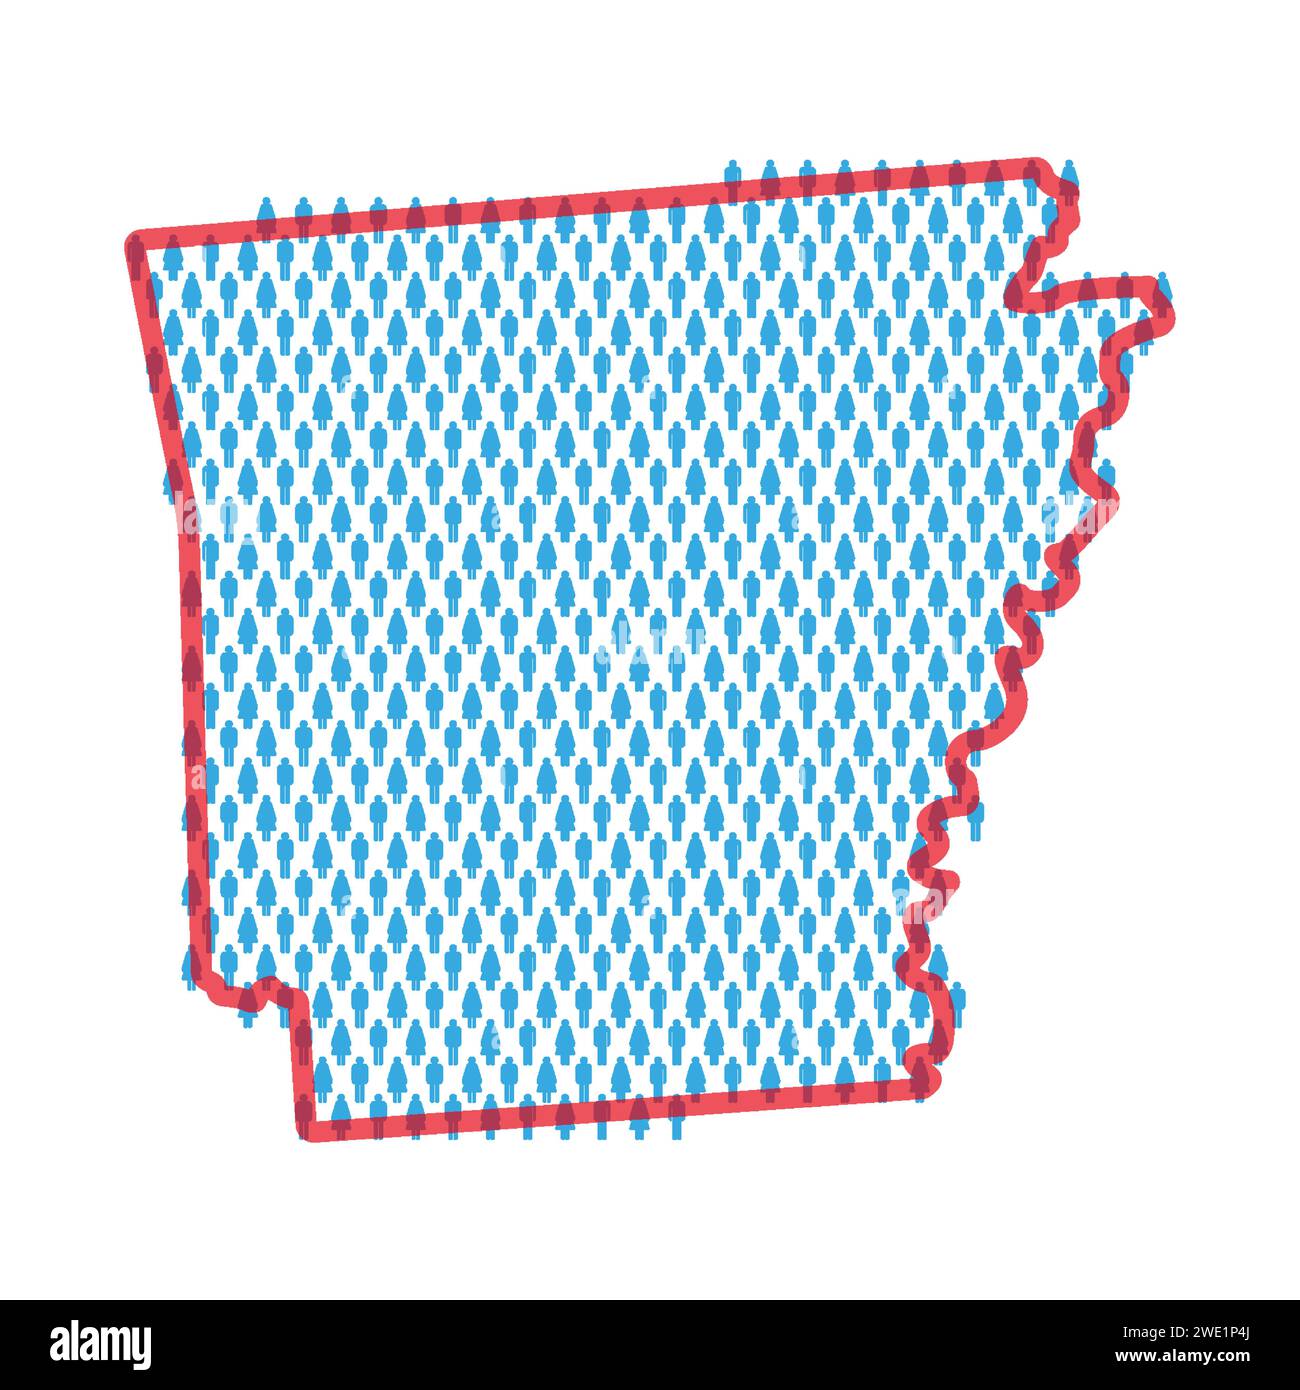 Arkansas population map. Stick figures people map with bold red translucent state border. Pattern of men and women icons. Isolated vector illustration Stock Vector